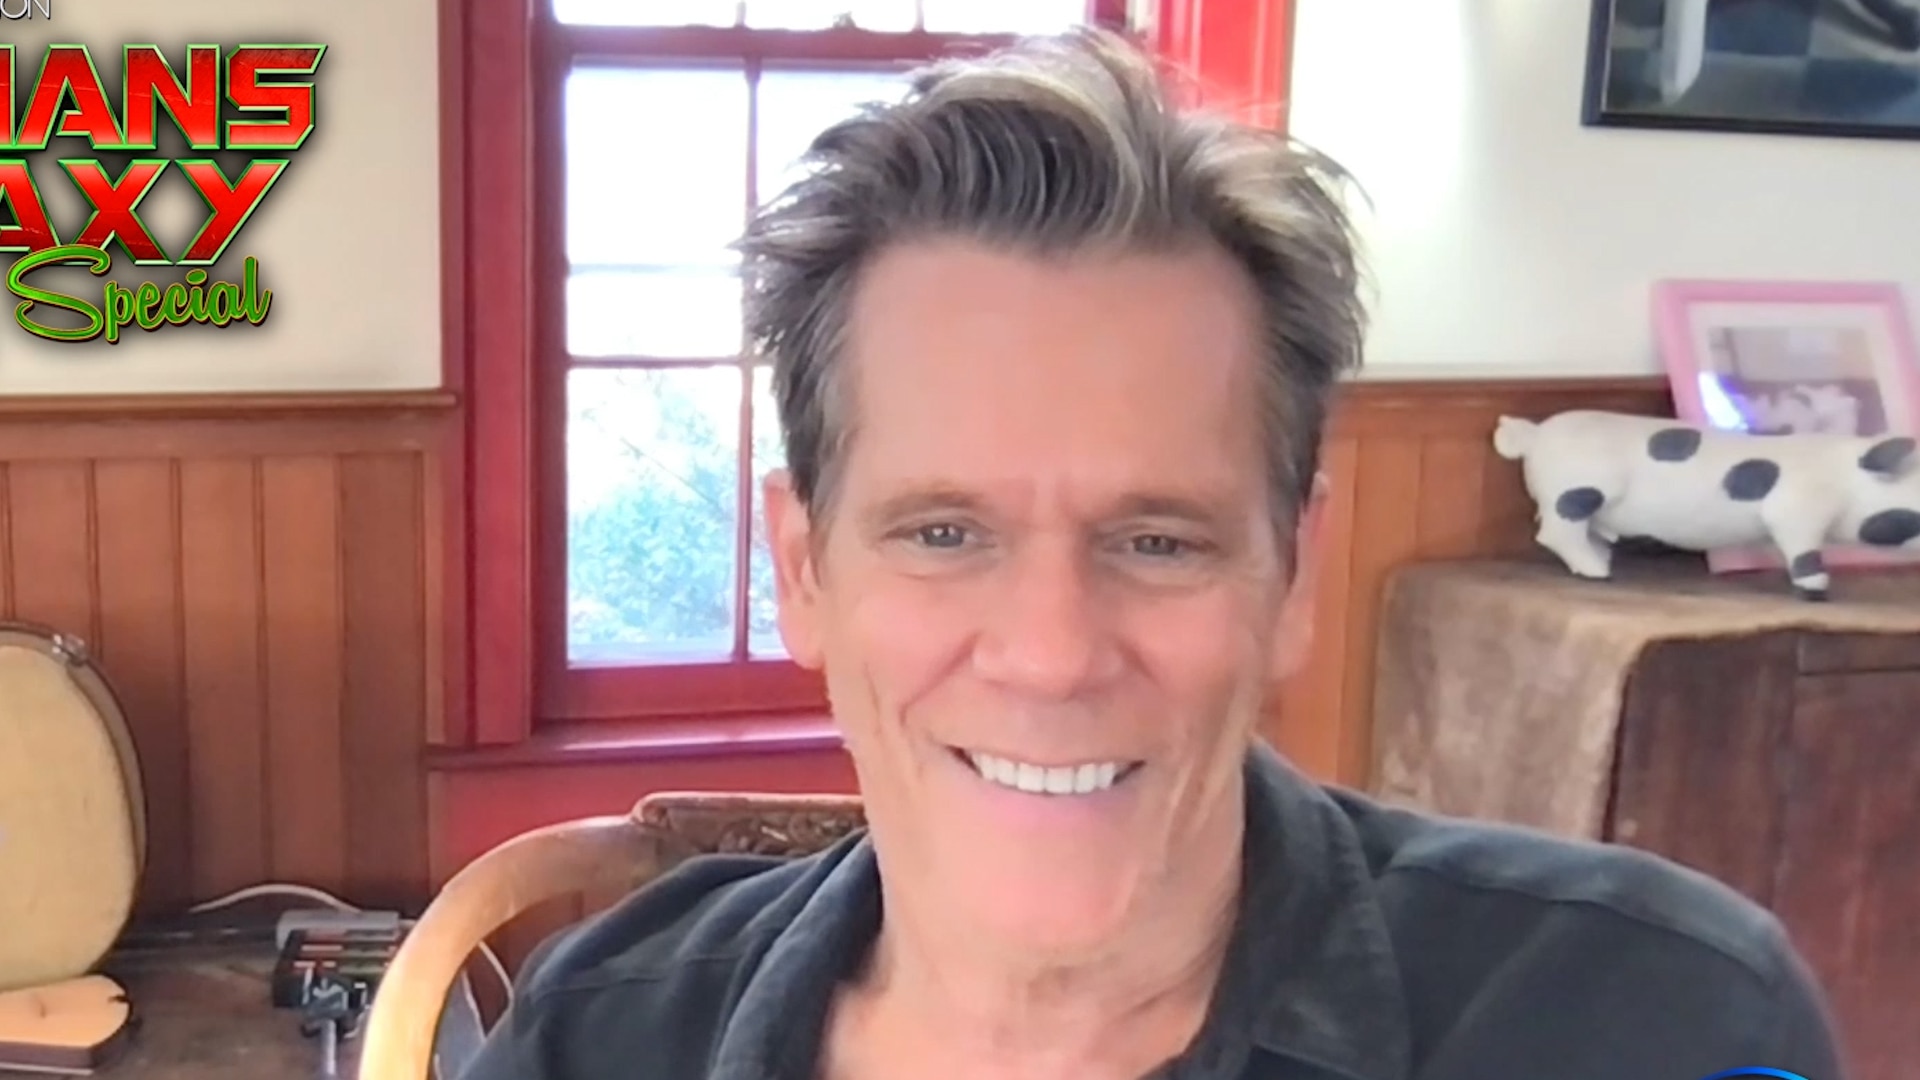 Kevin Bacon reveals he spent “hours” trying to master Meghan